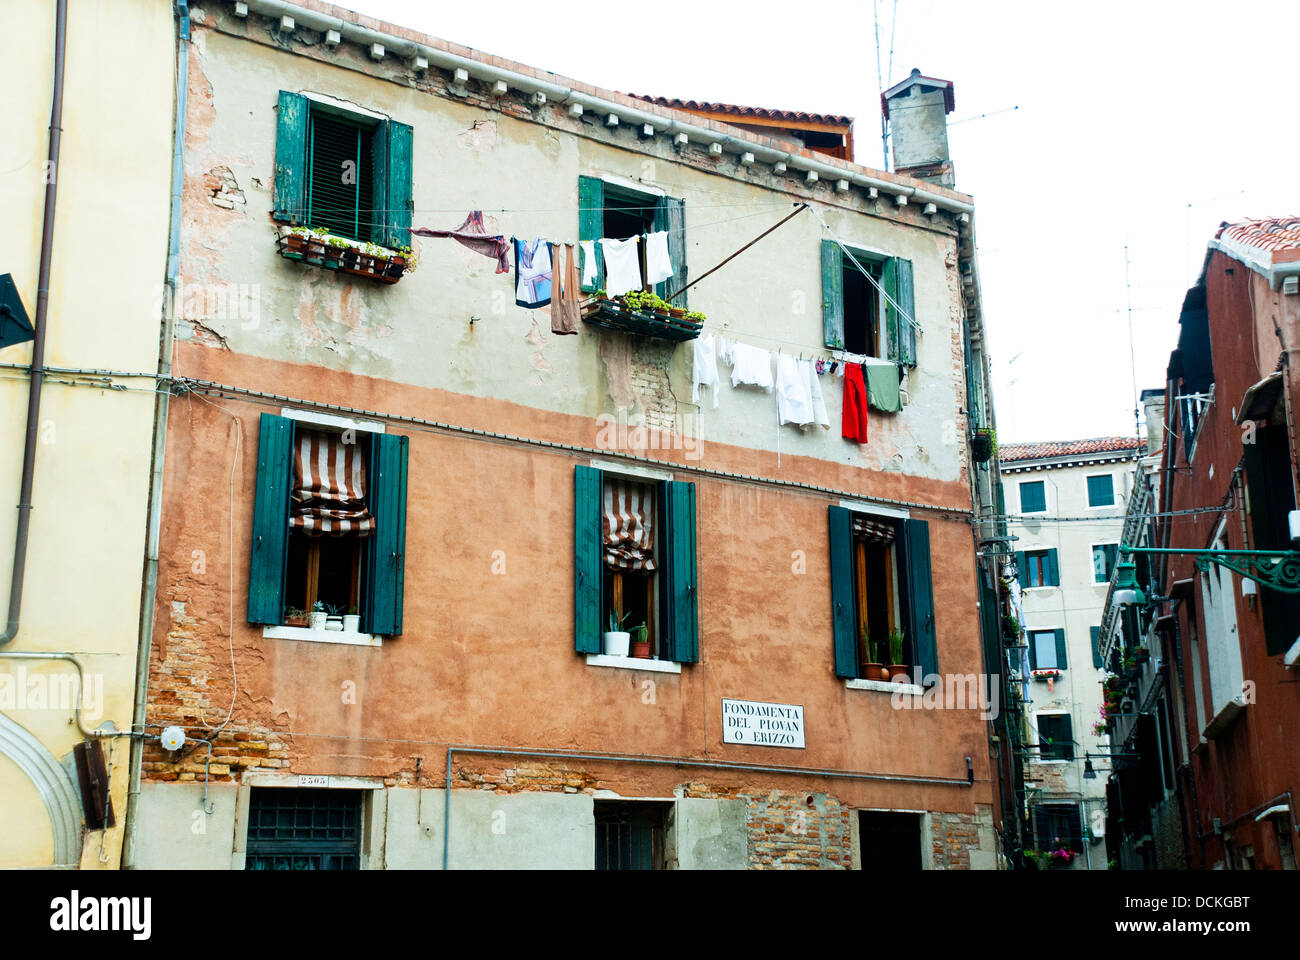 Washing hanging from a faded Venietian building in Venice, Italy Stock Photo